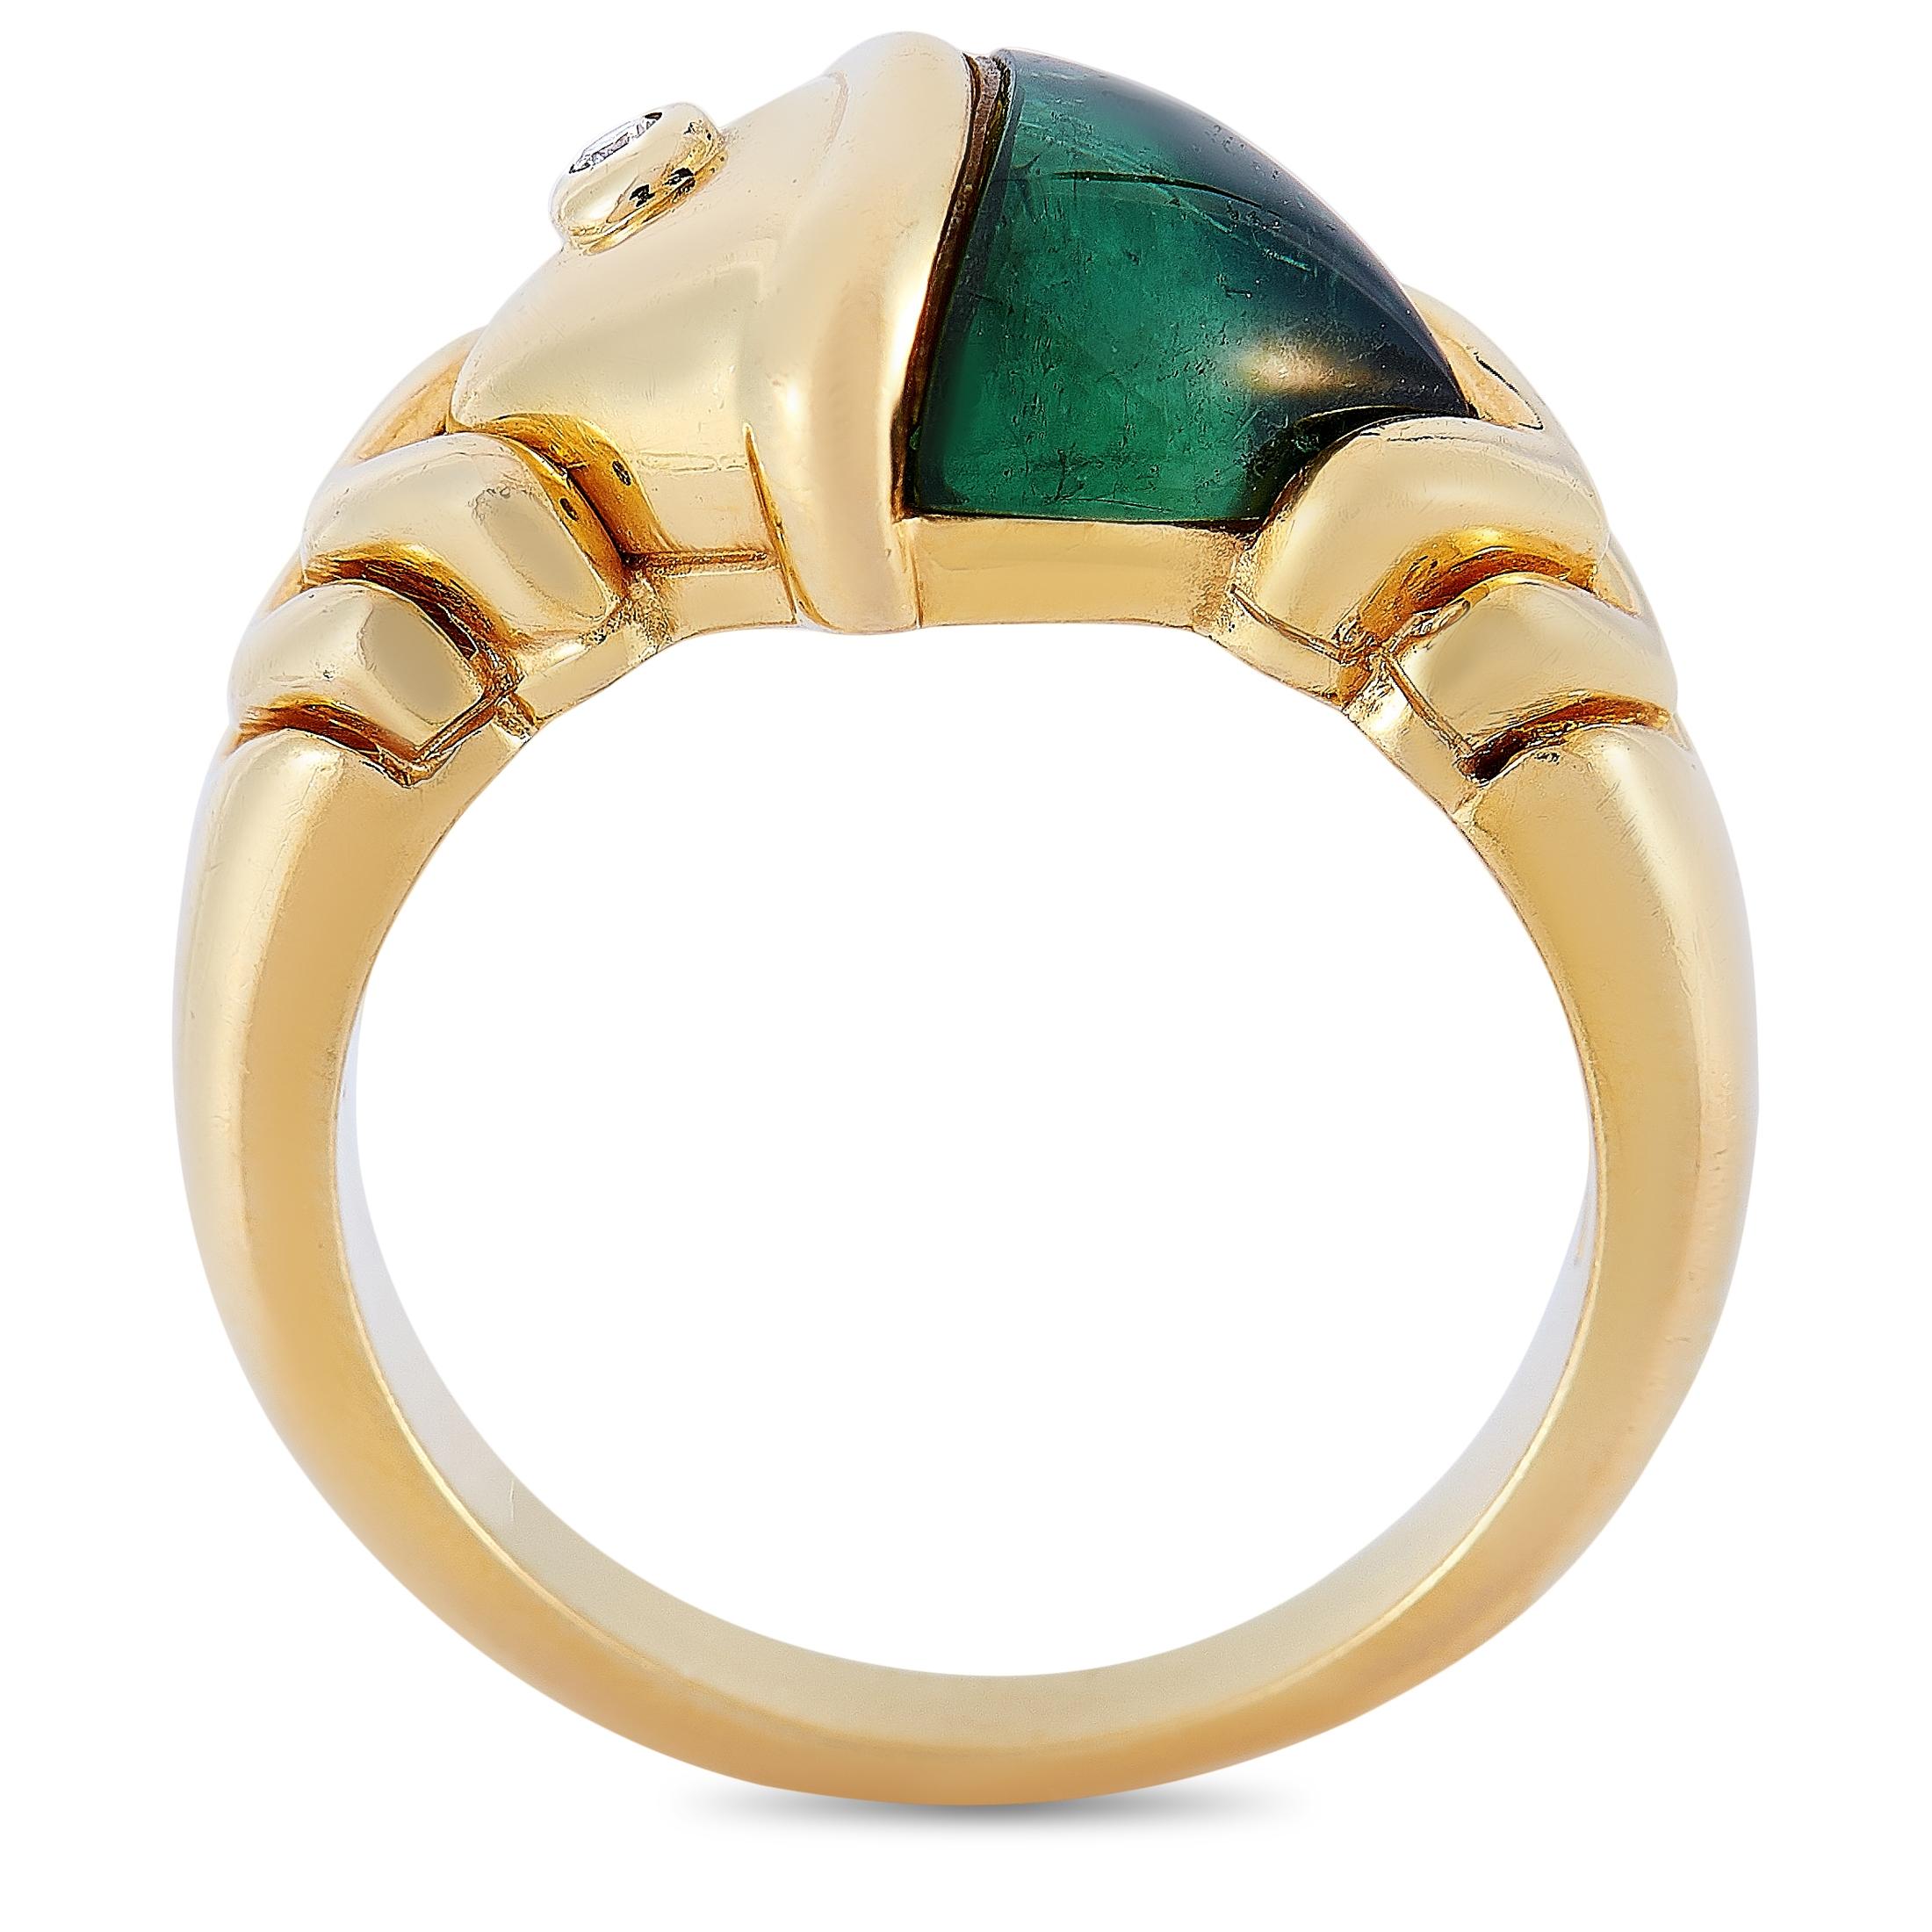 This Bvlgari ring is crafted from 18K yellow gold and embellished with a tourmaline. The ring weighs 8.8 grams and boasts band thickness of 3 mm and top height of 5 mm, while top dimensions measure 13 by 9 mm.
 
 Offered in estate condition, this